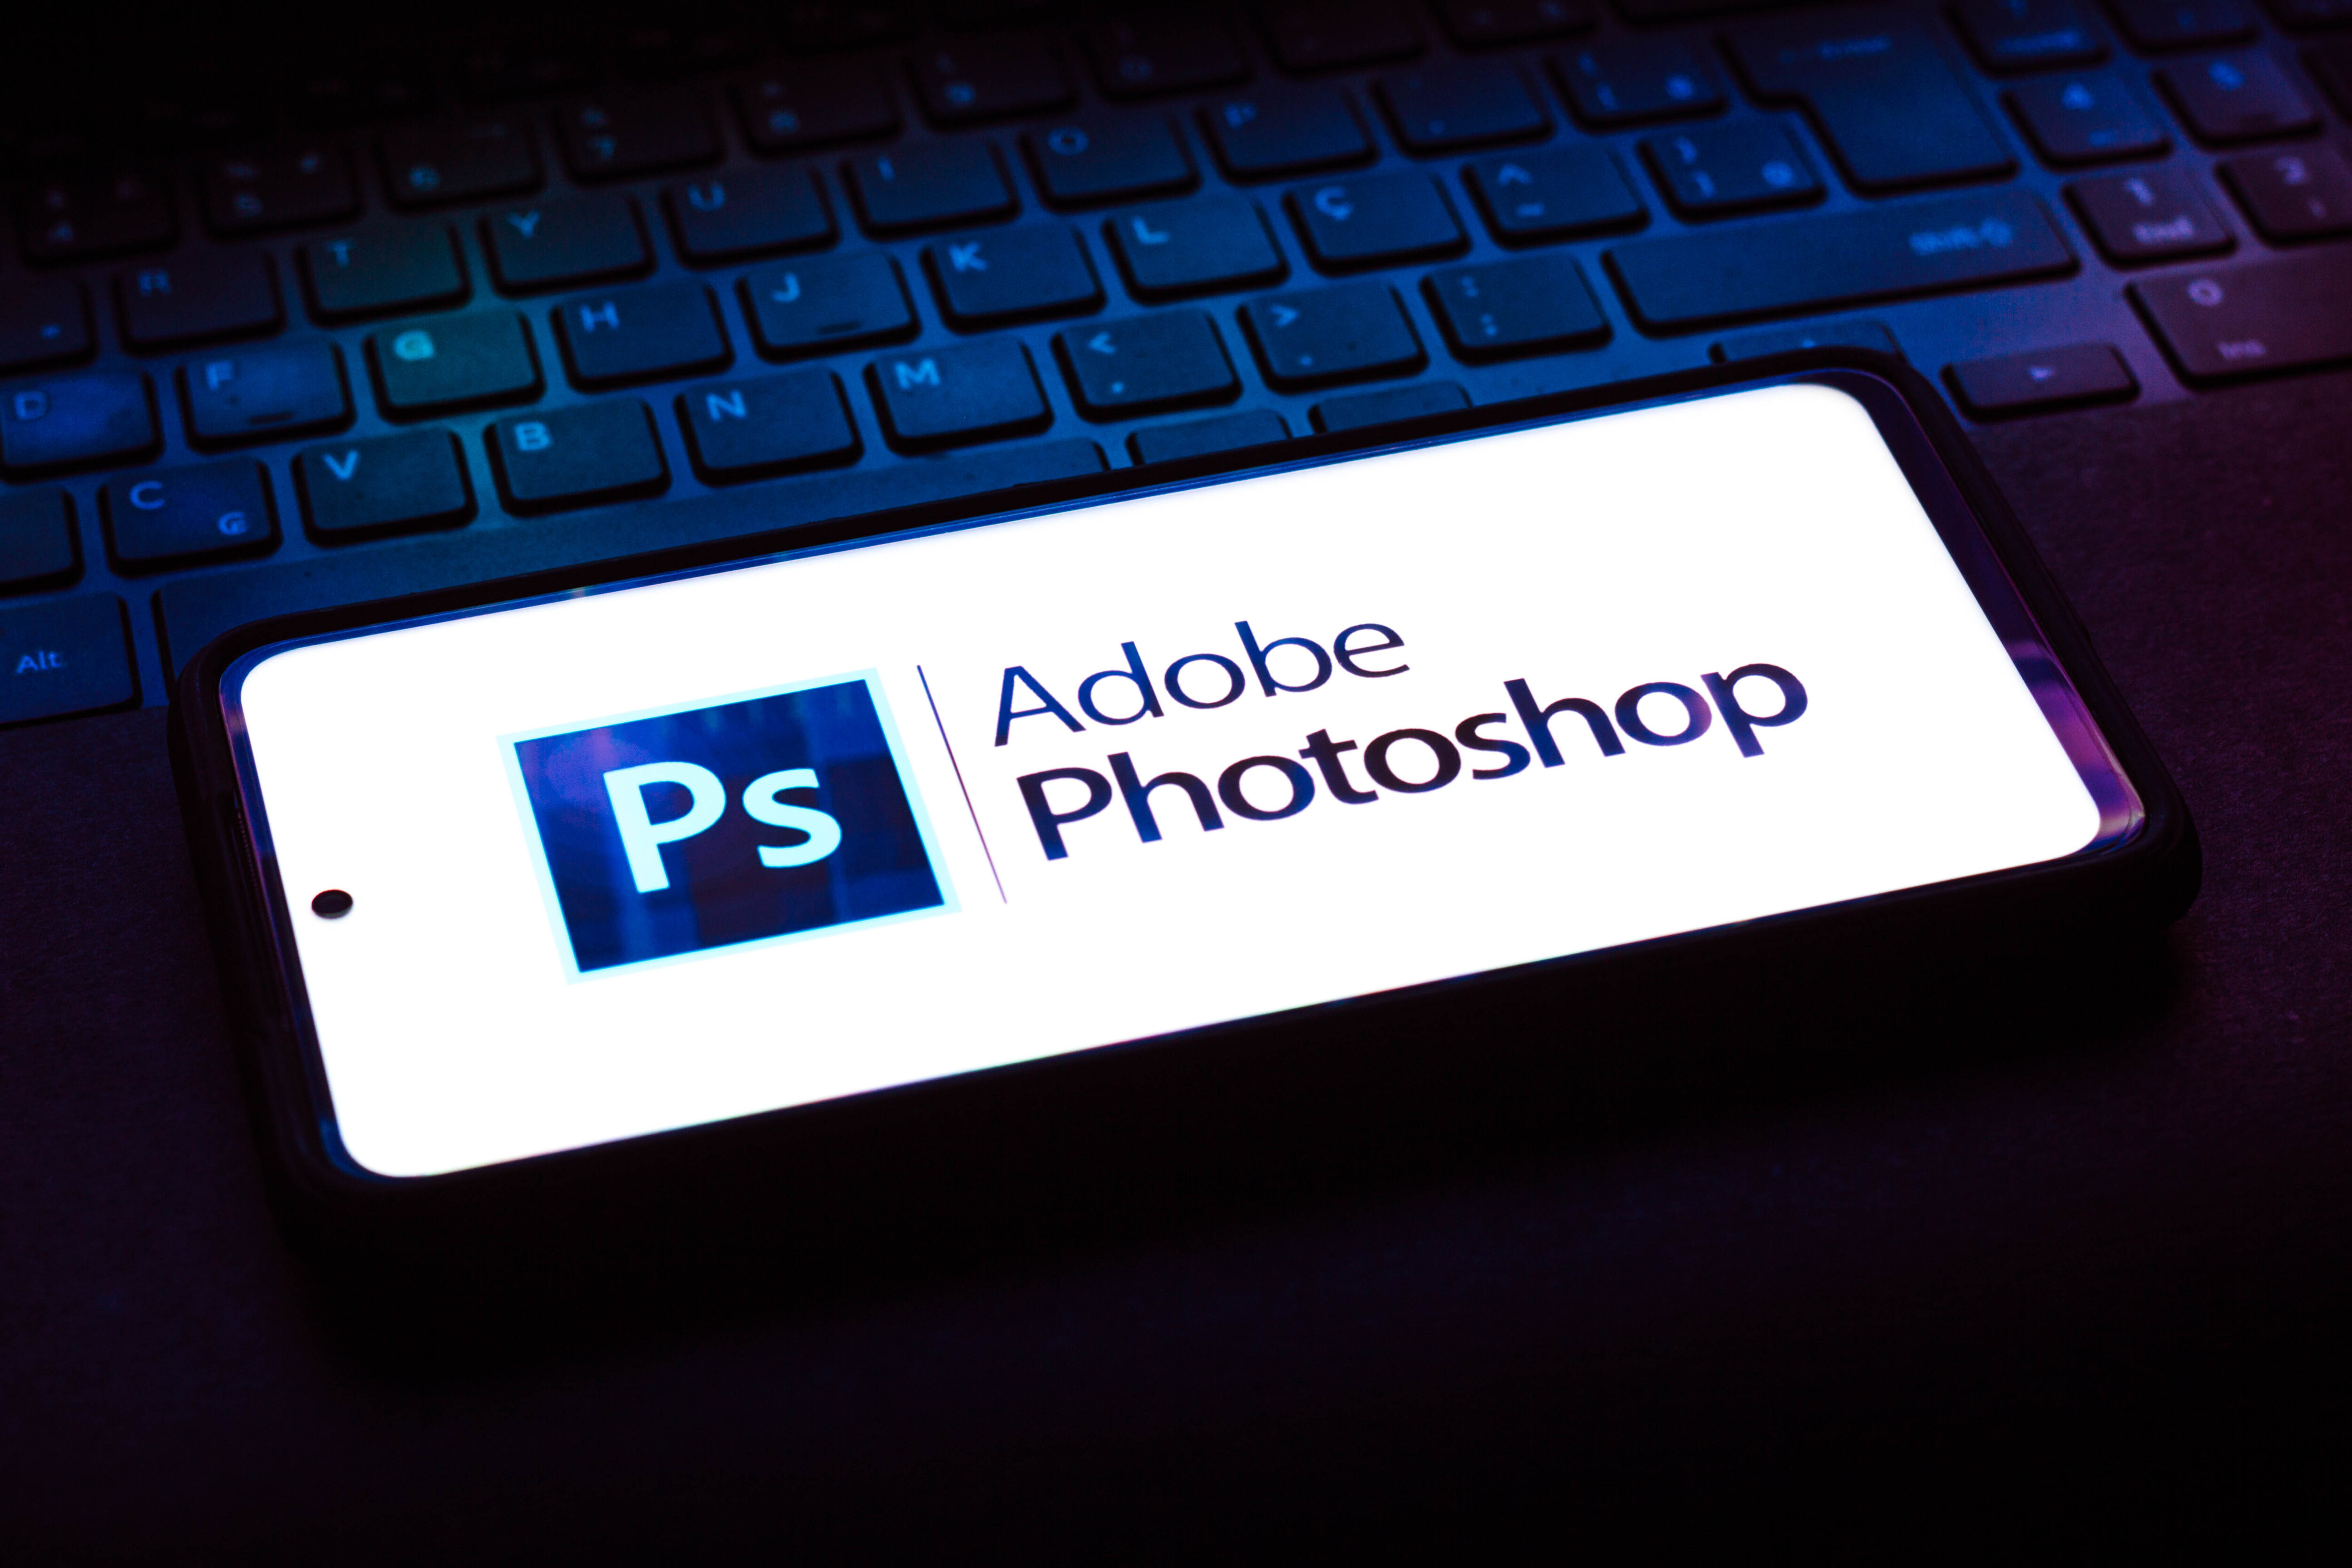 Adobe will release a free version of Photoshop for browsers